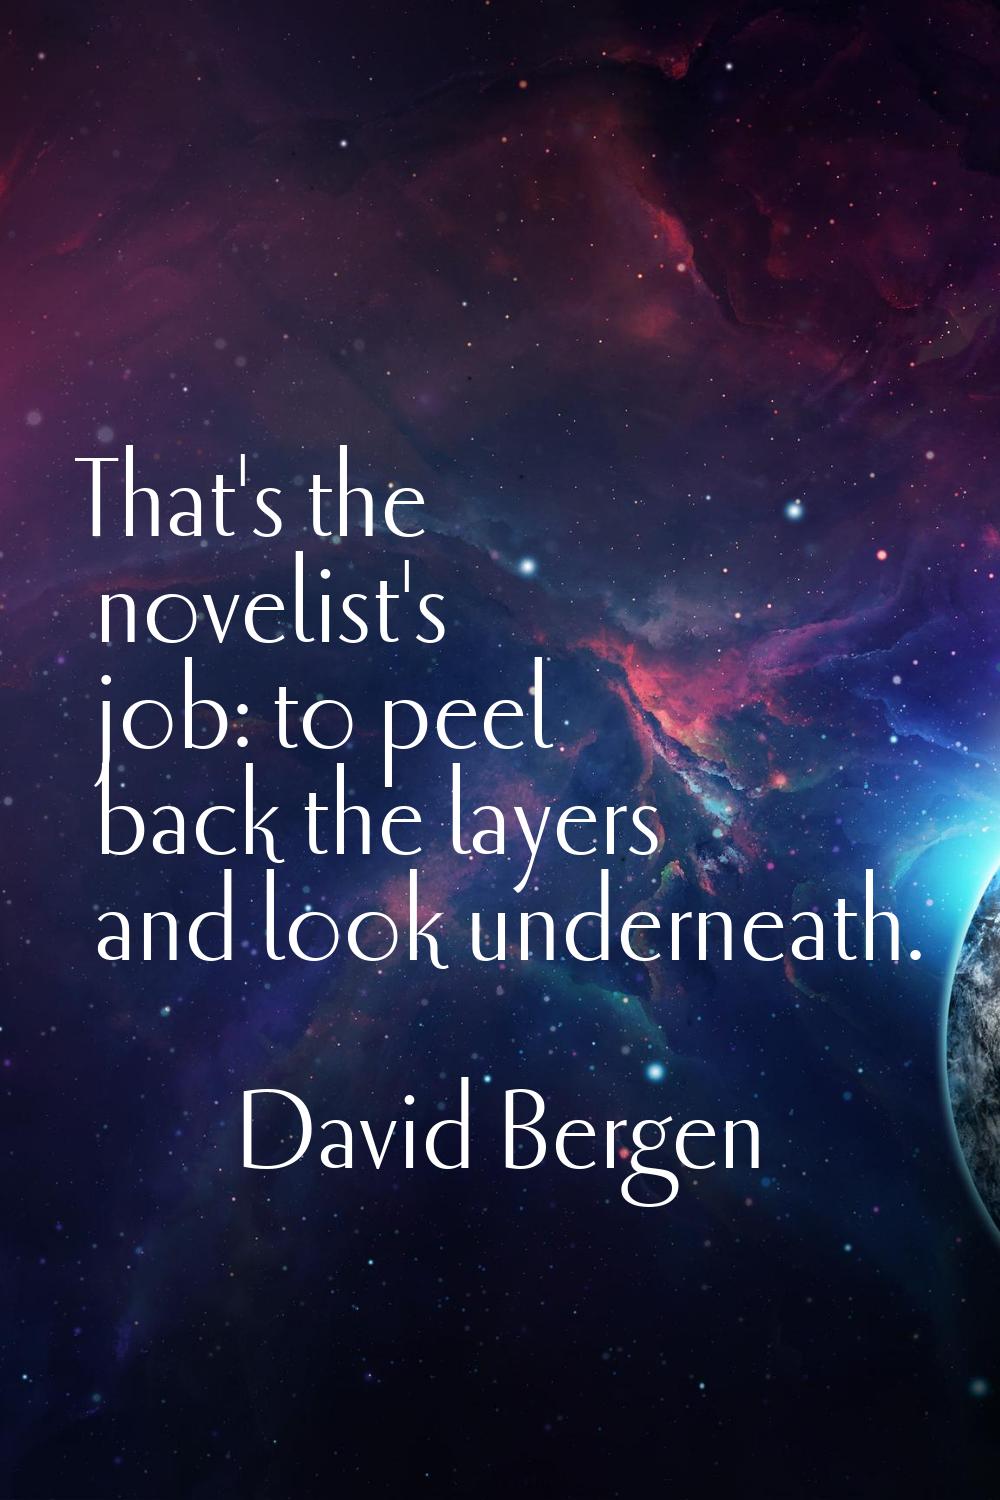 That's the novelist's job: to peel back the layers and look underneath.